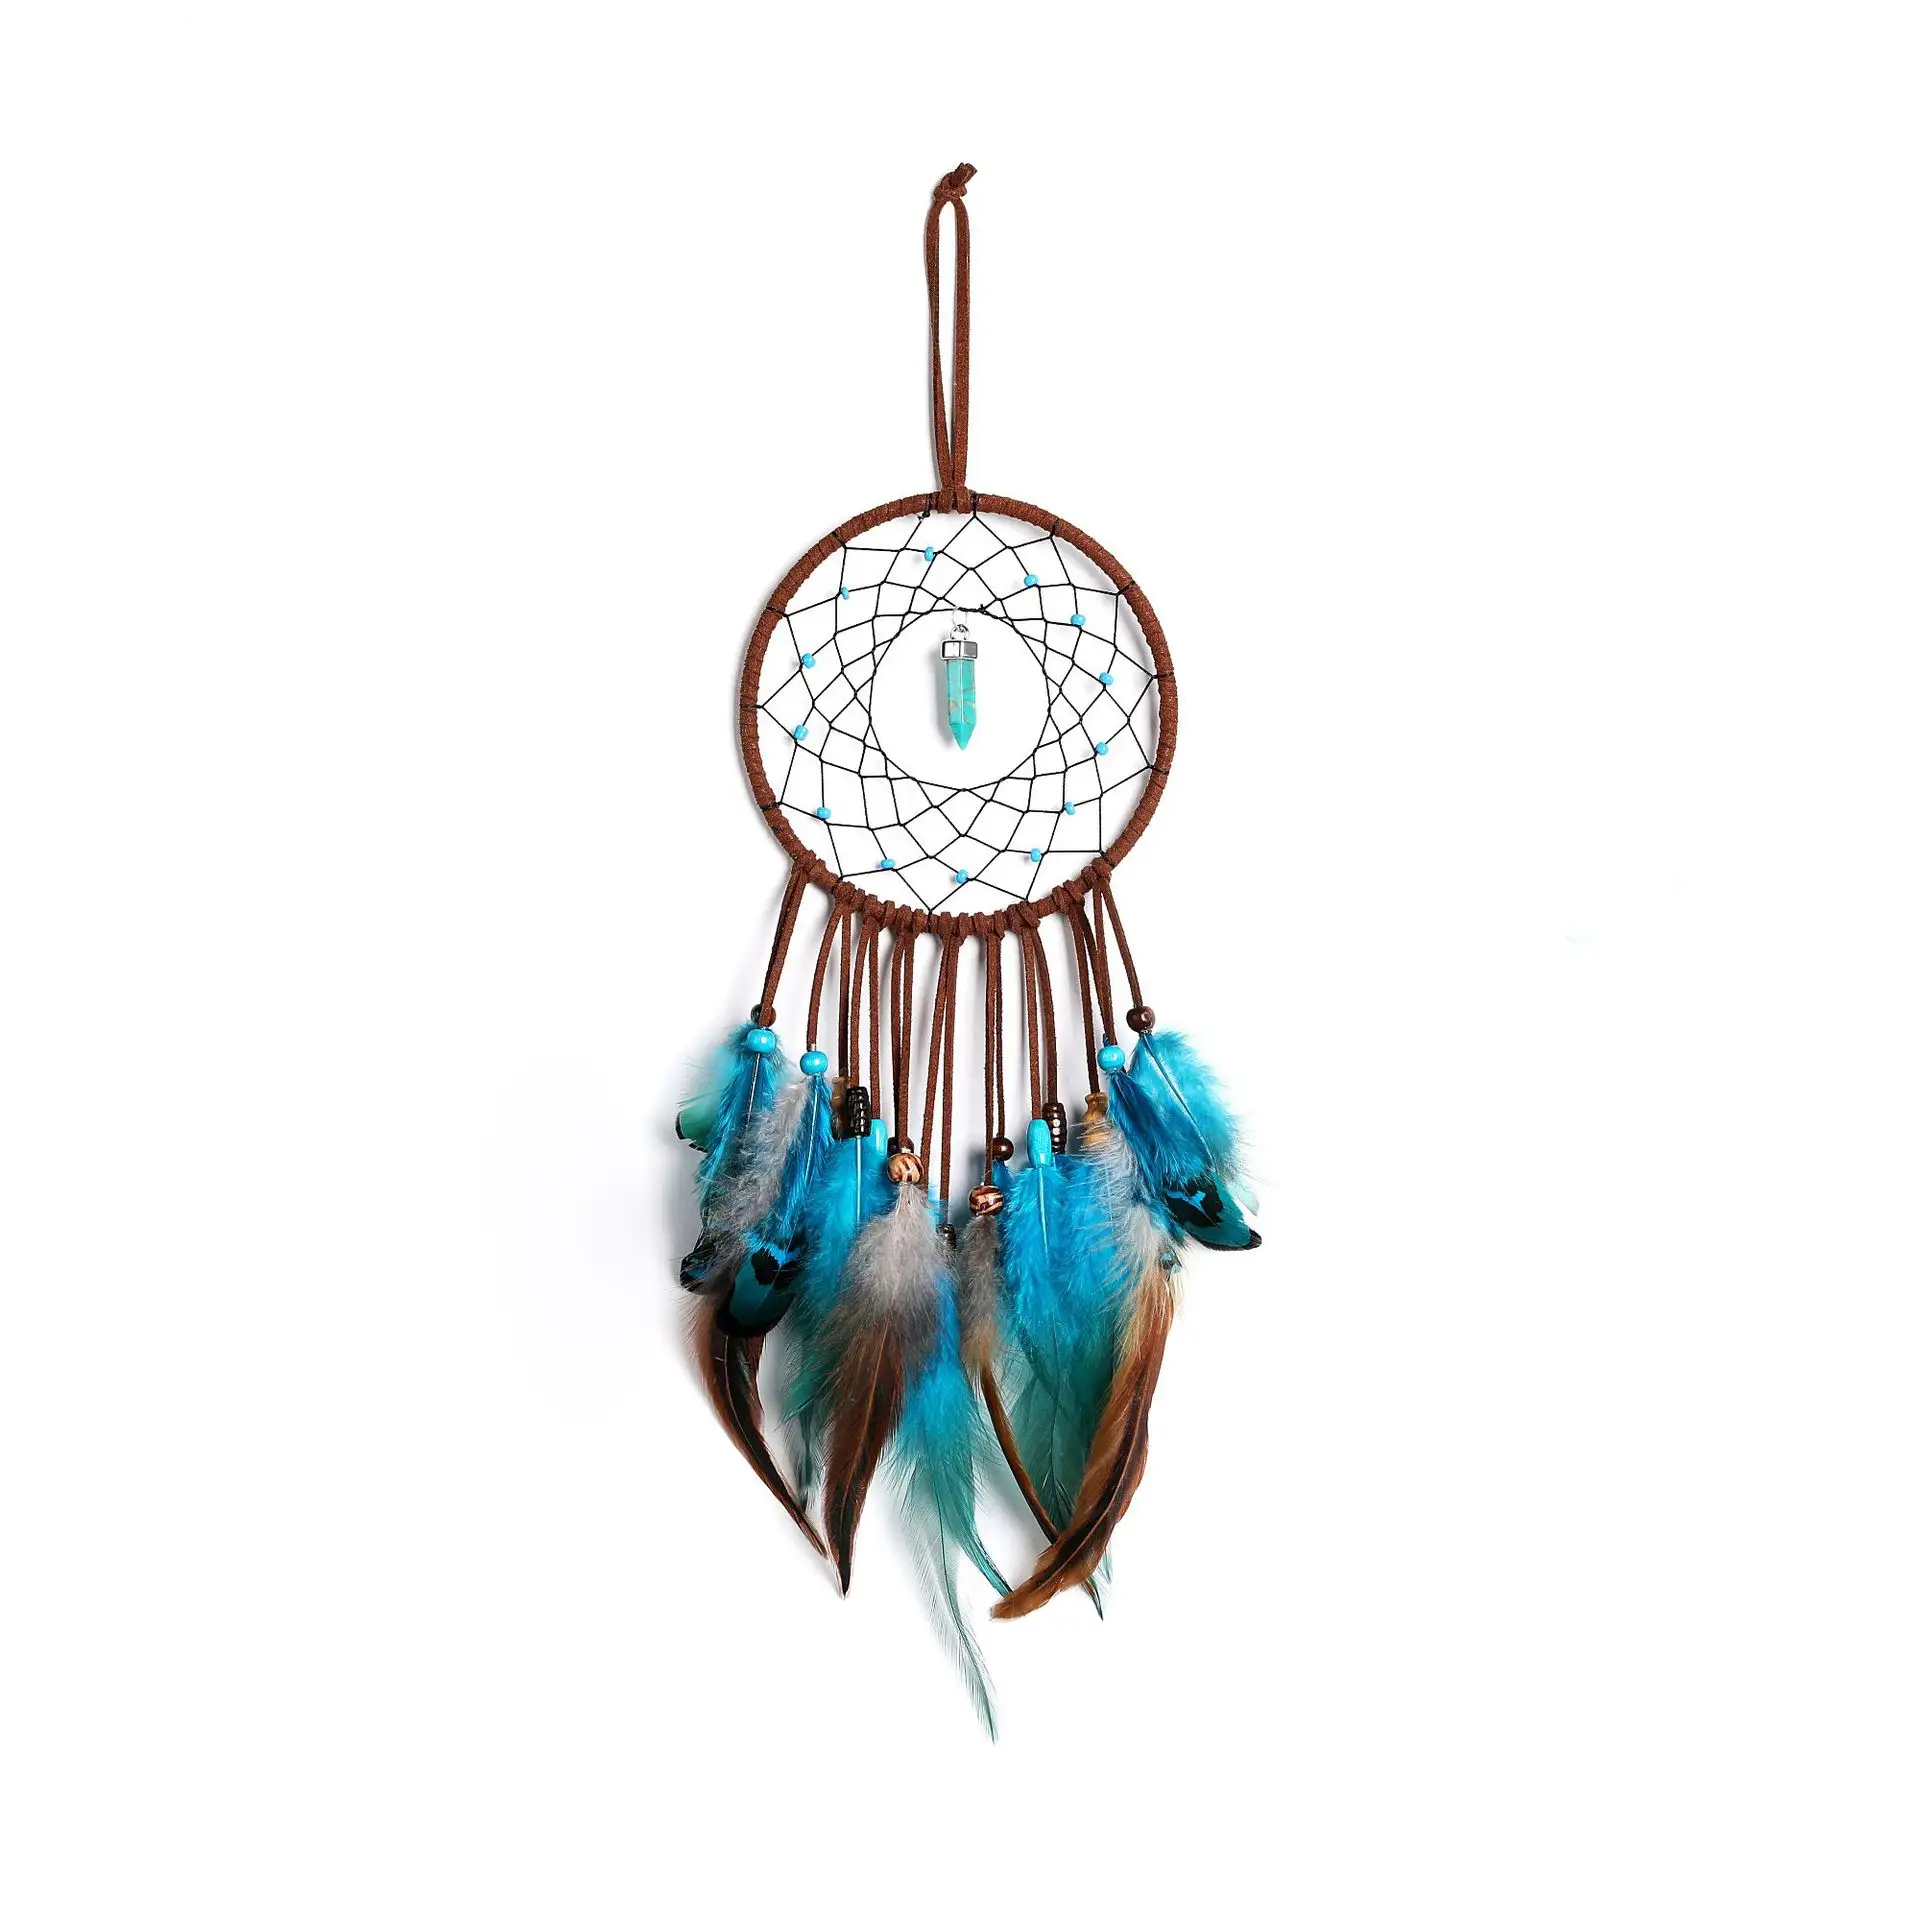 Indian heirs catching dreams wind chimes make up hanging ornament birthday gift for girlfriend